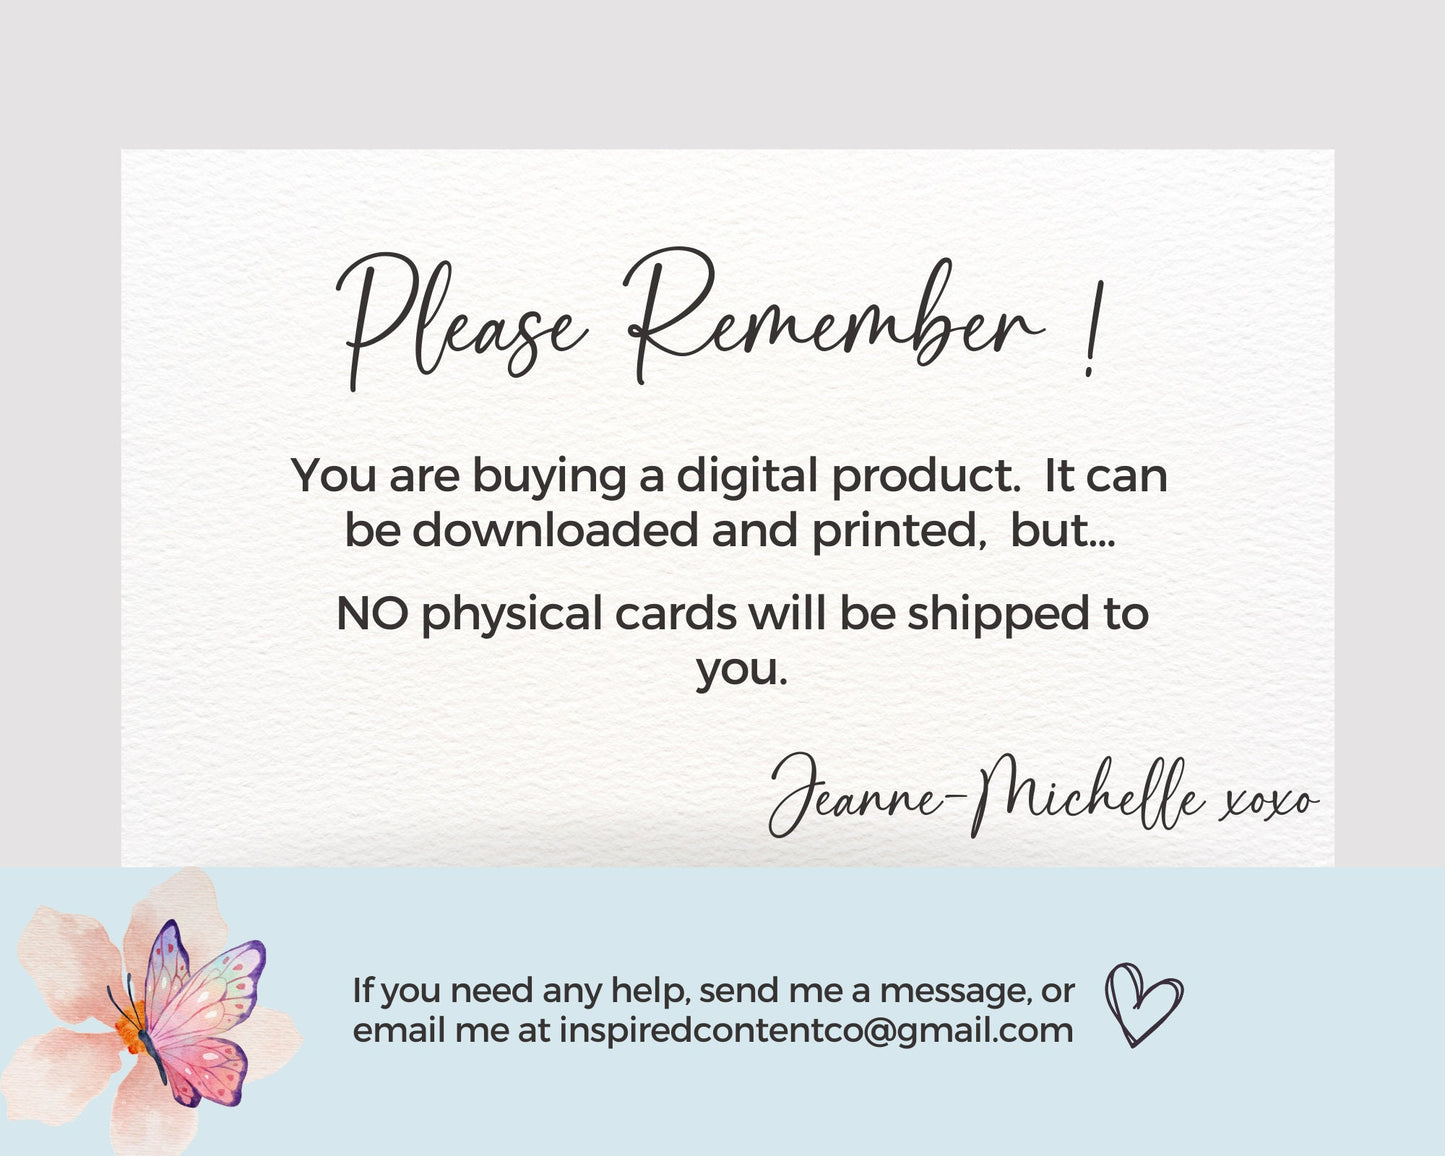 Birth Flower Cards - Watercolor Birth Flower Meaning Cards, Month of the Year Birth Flower Info Cards in Canva, Birth Flower Jewelry Inserts